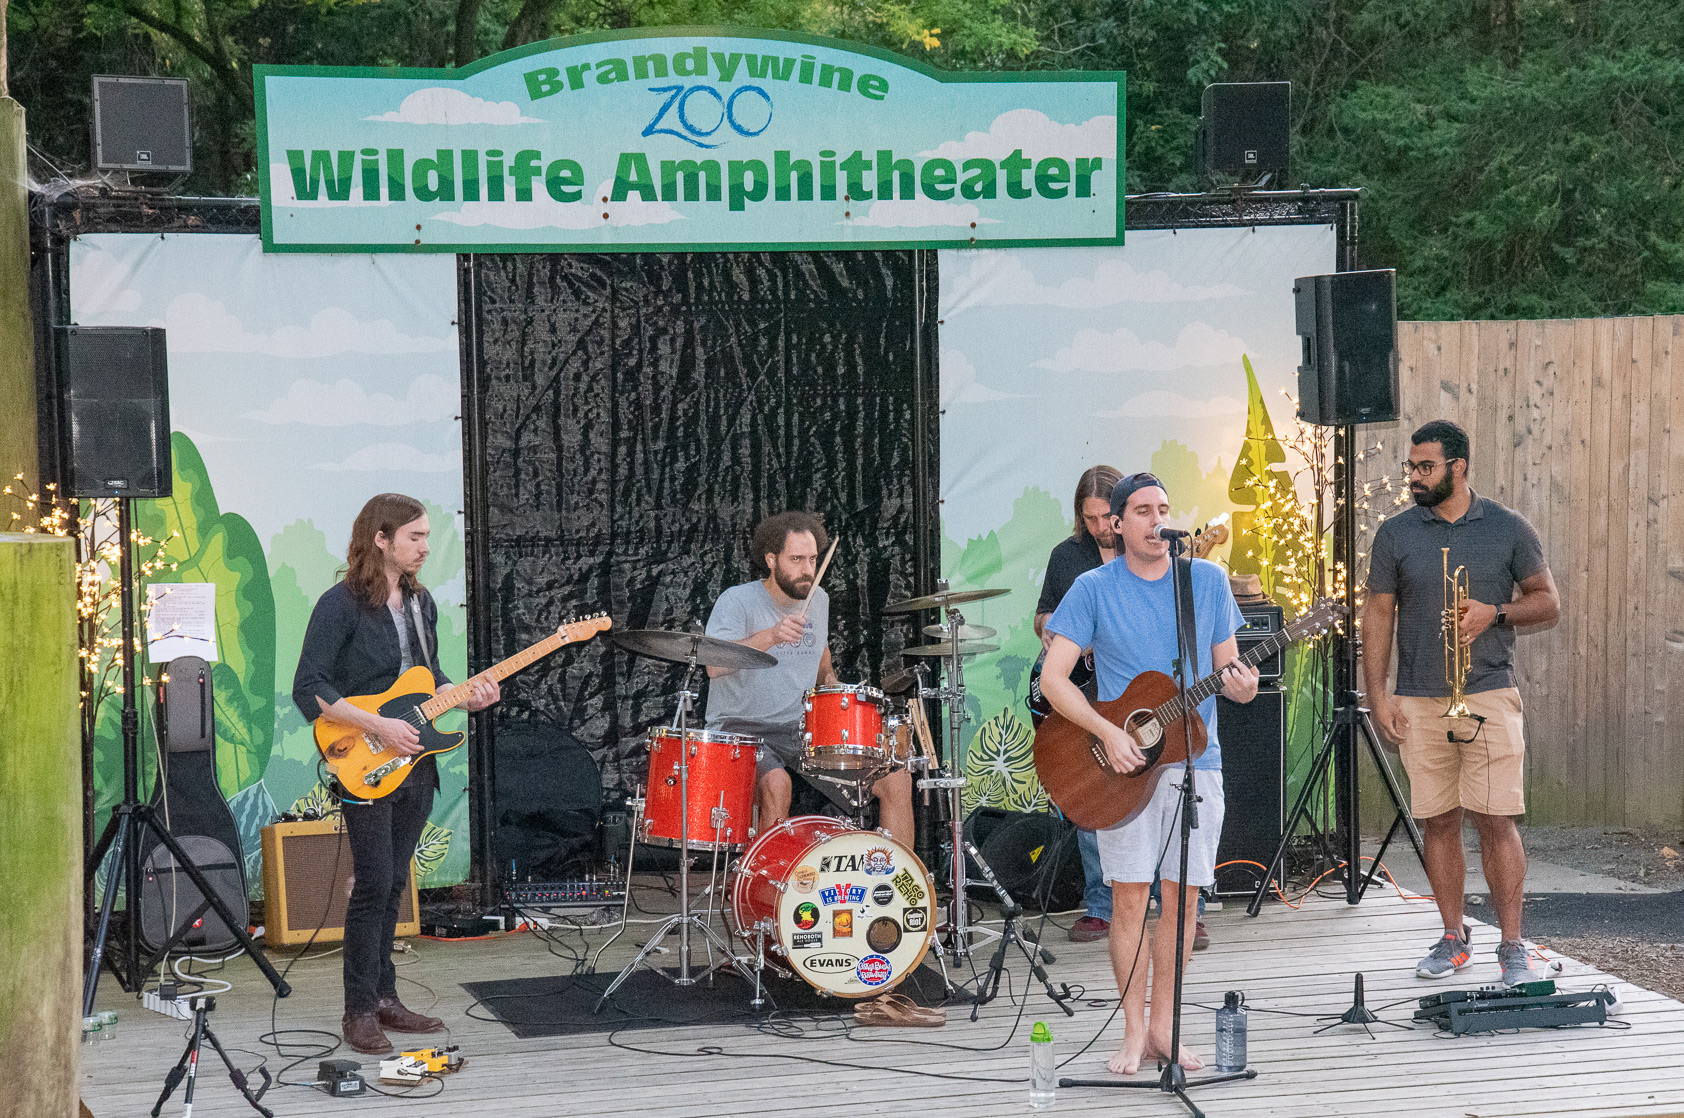 Spokey Speaky Band playing at the brandywine zoo